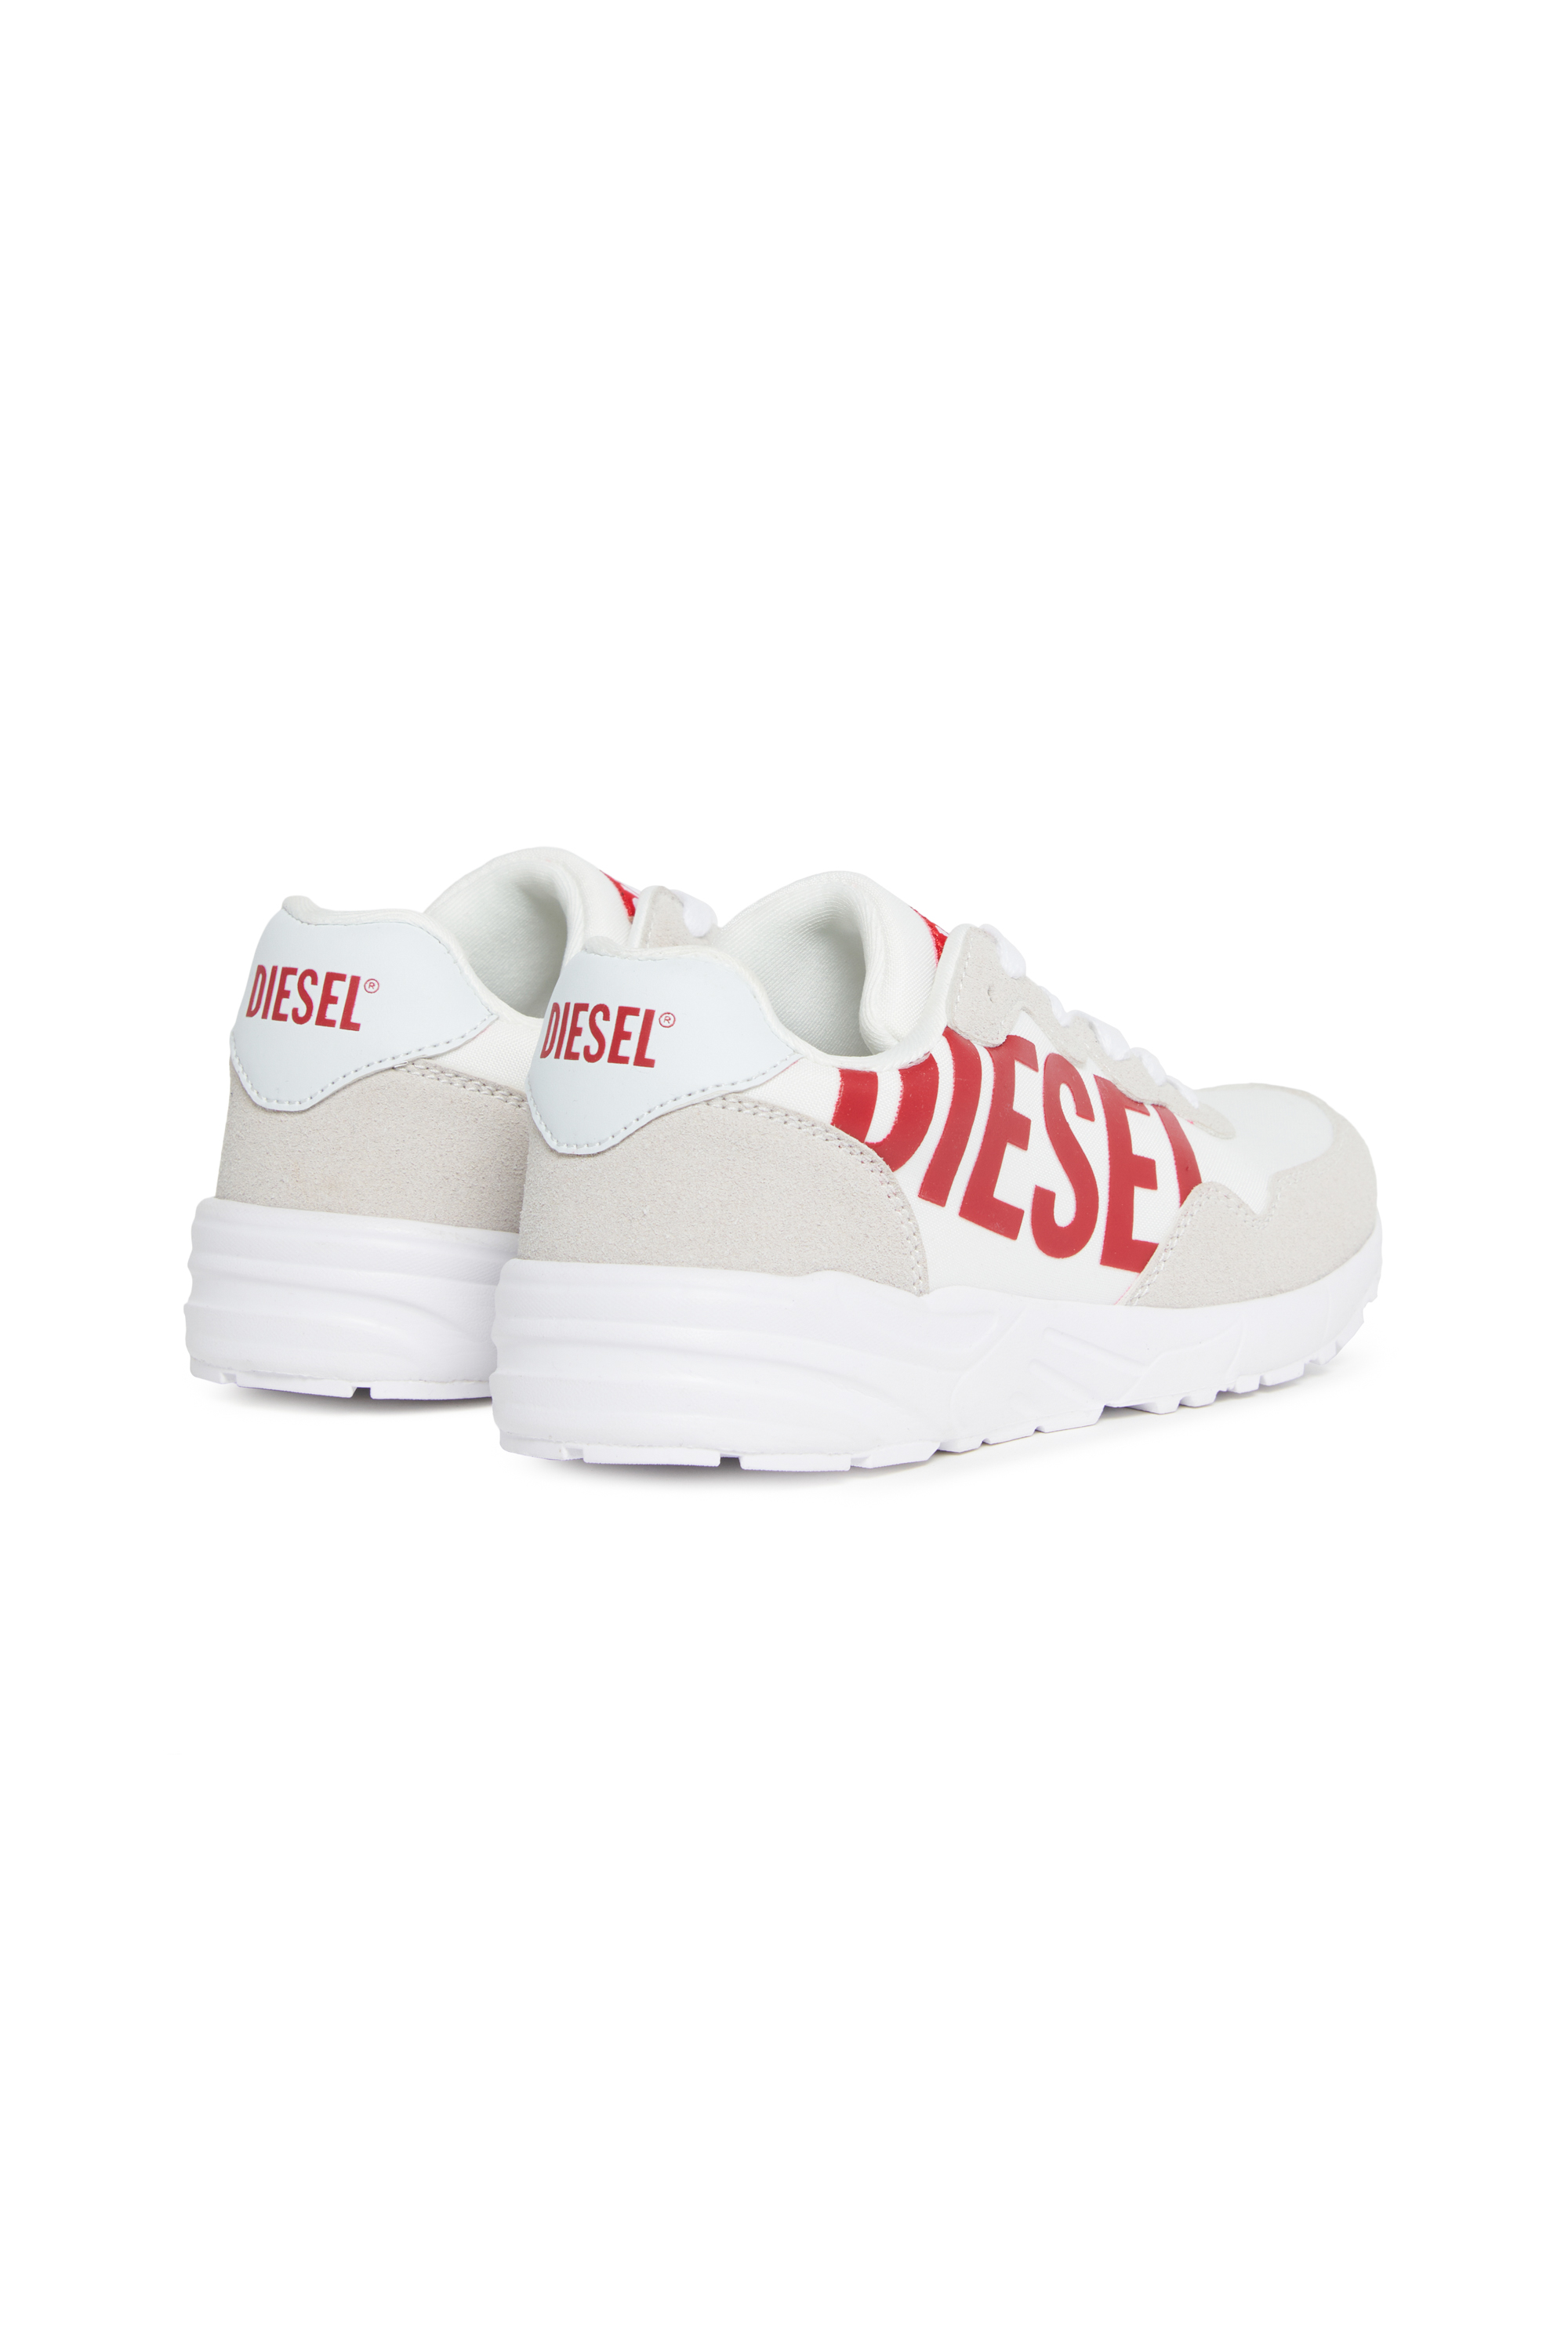 Diesel - S-STAR LIGHT LC, Weiss/Rot - Image 4